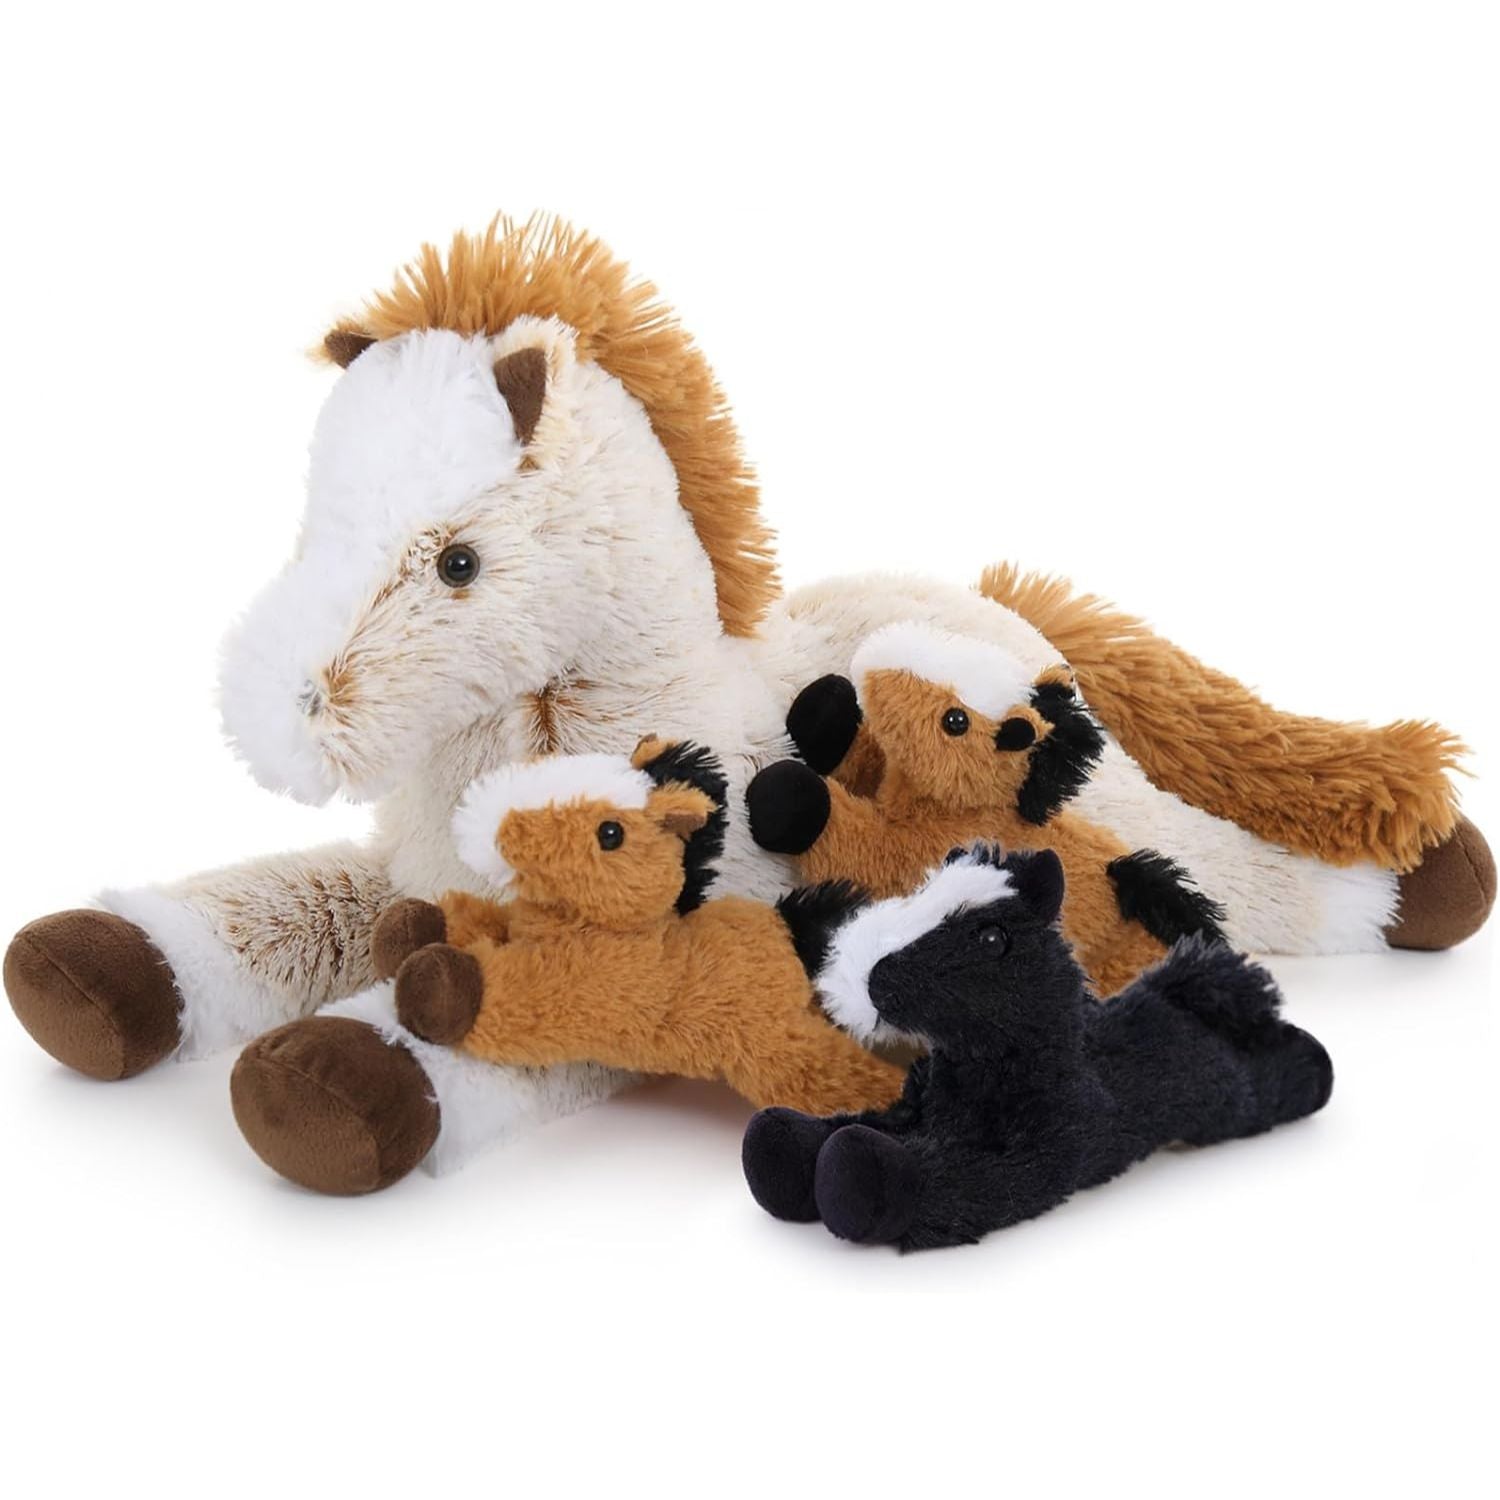 4 Pcs Horse Plush Toys, Brown/Light Brown, 21 Inches